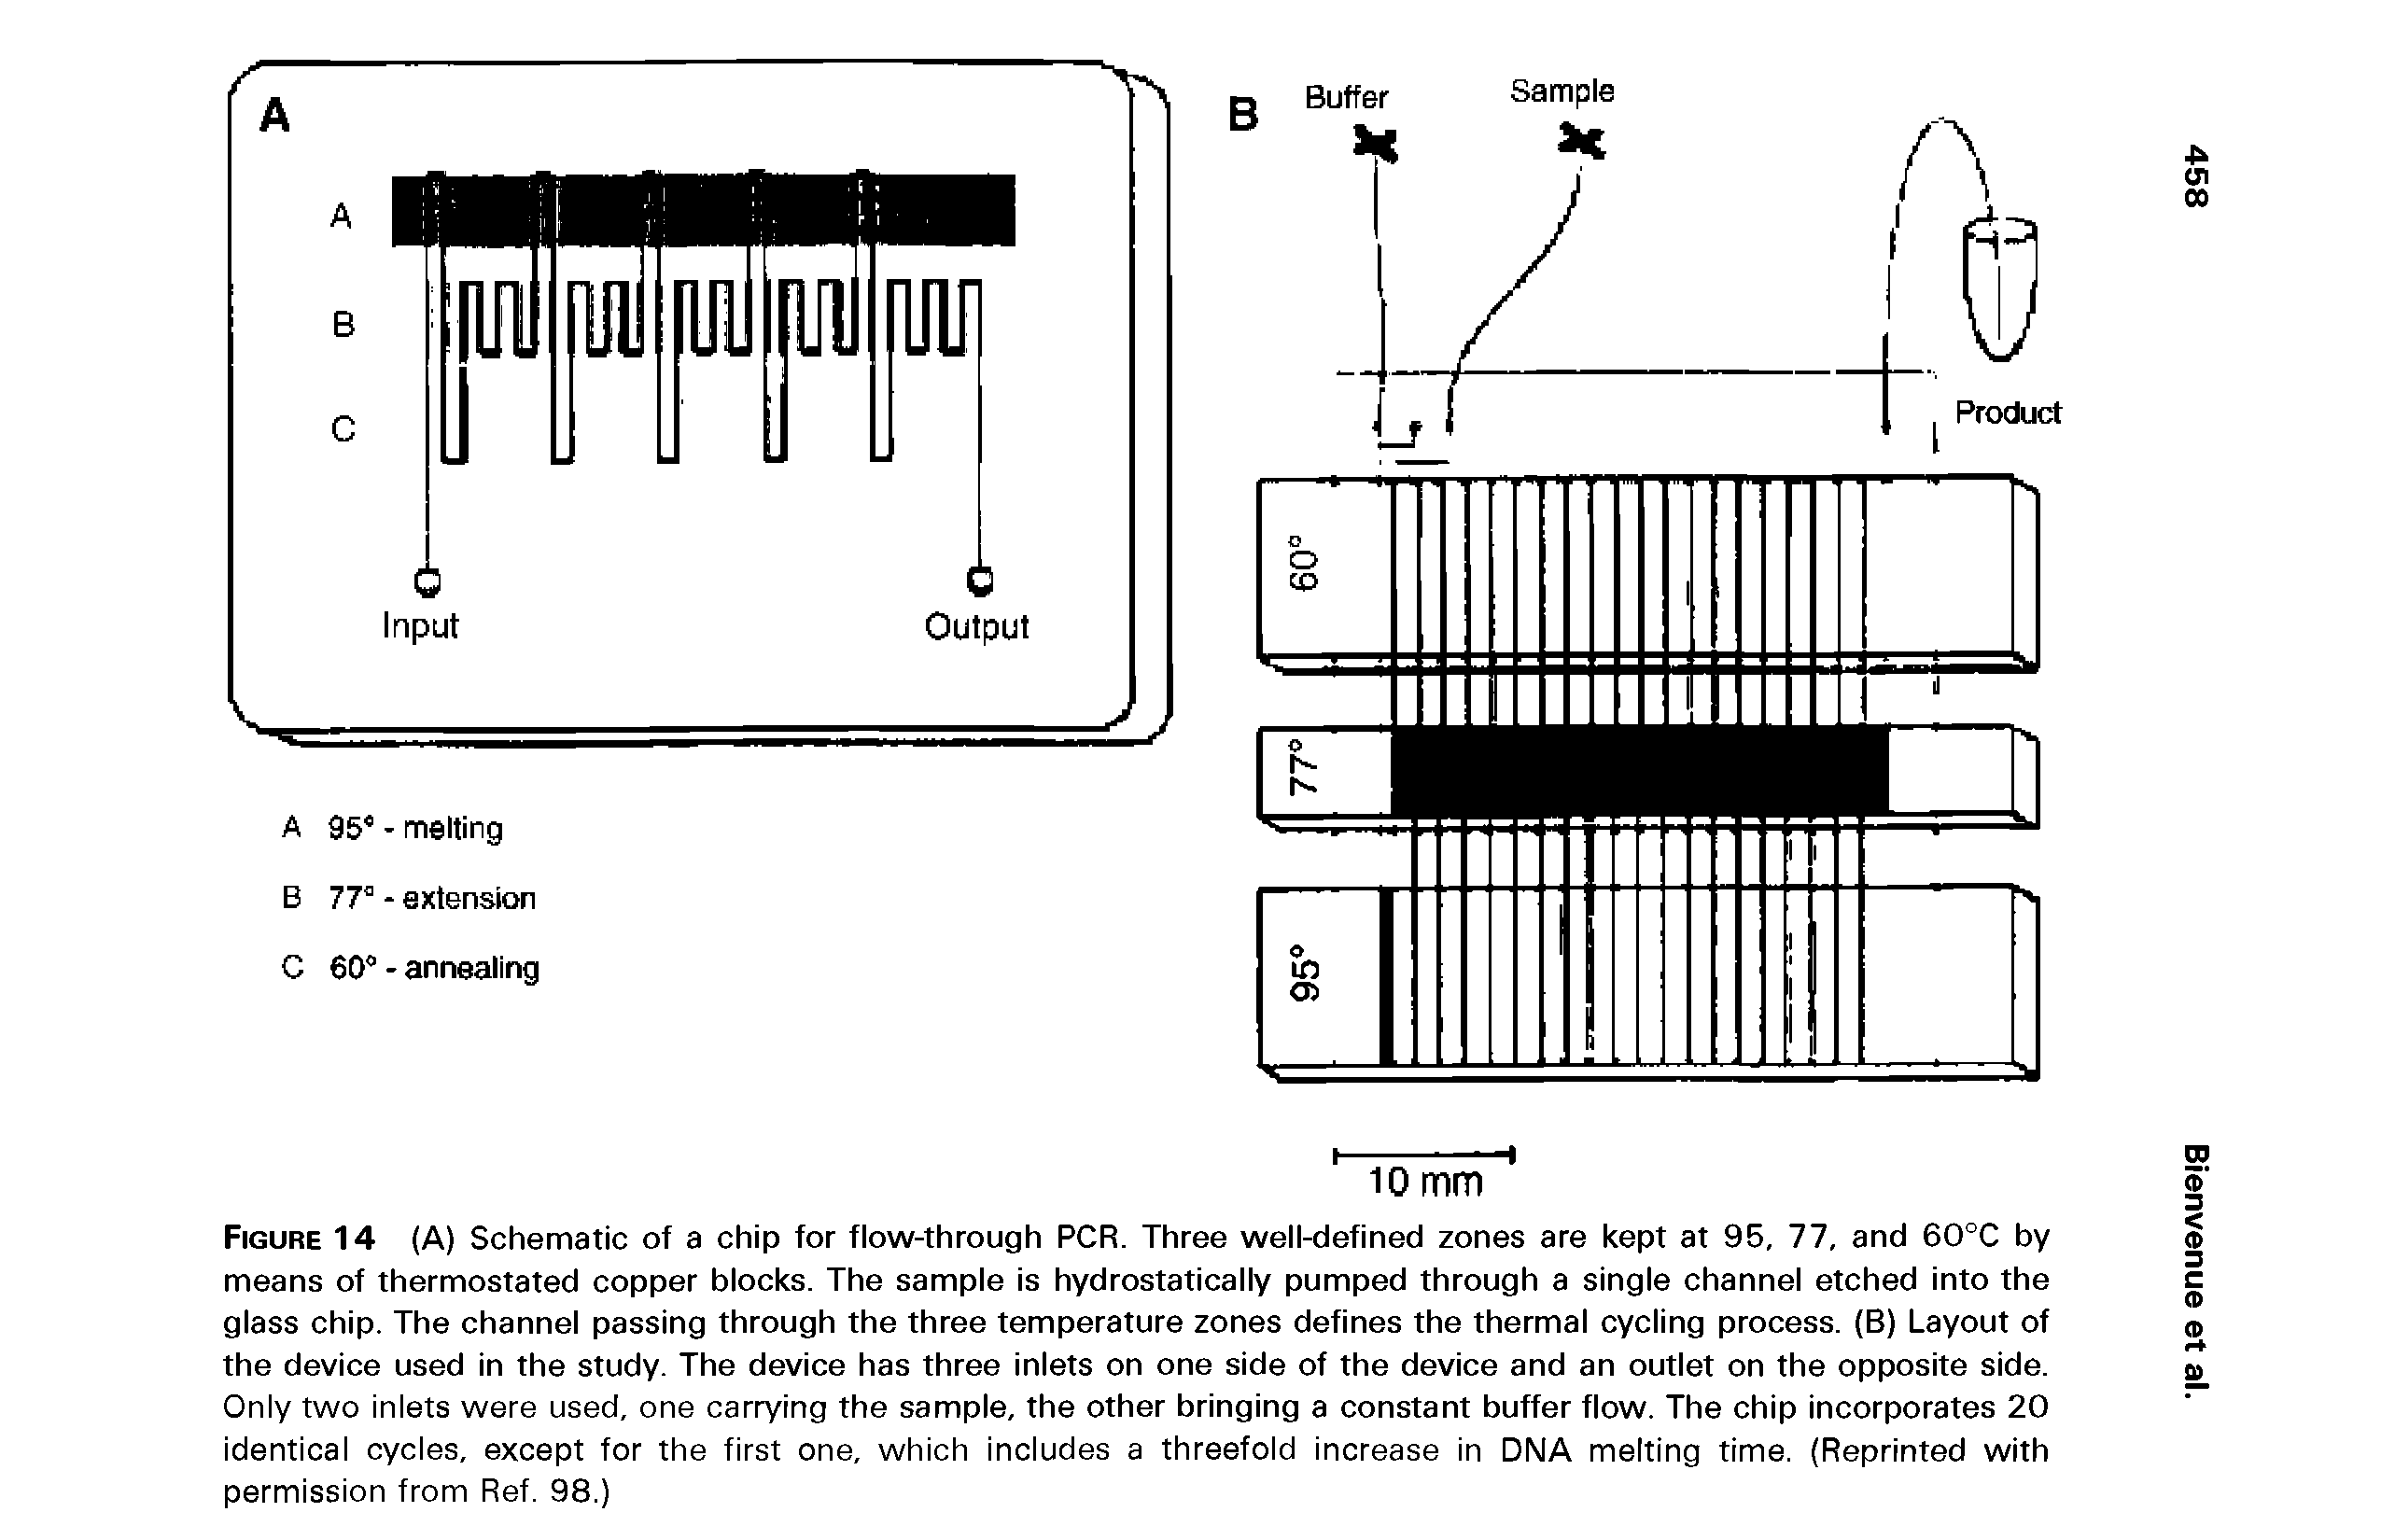 Figure 14 (A) Schematic of a chip for flow-through PCR. Three well-defined zones are kept at 95, 77, and 60°C by means of thermostated copper blocks. The sample is hydrostatically pumped through a single channel etched into the glass chip. The channel passing through the three temperature zones defines the thermal cycling process. (B) Layout of the device used in the study. The device has three inlets on one side of the device and an outlet on the opposite side. Only two inlets were used, one carrying the sample, the other bringing a constant buffer flow. The chip incorporates 20 identical cycles, except for the first one, which includes a threefold increase in DNA melting time. (Reprinted with permission from Ref. 98.)...